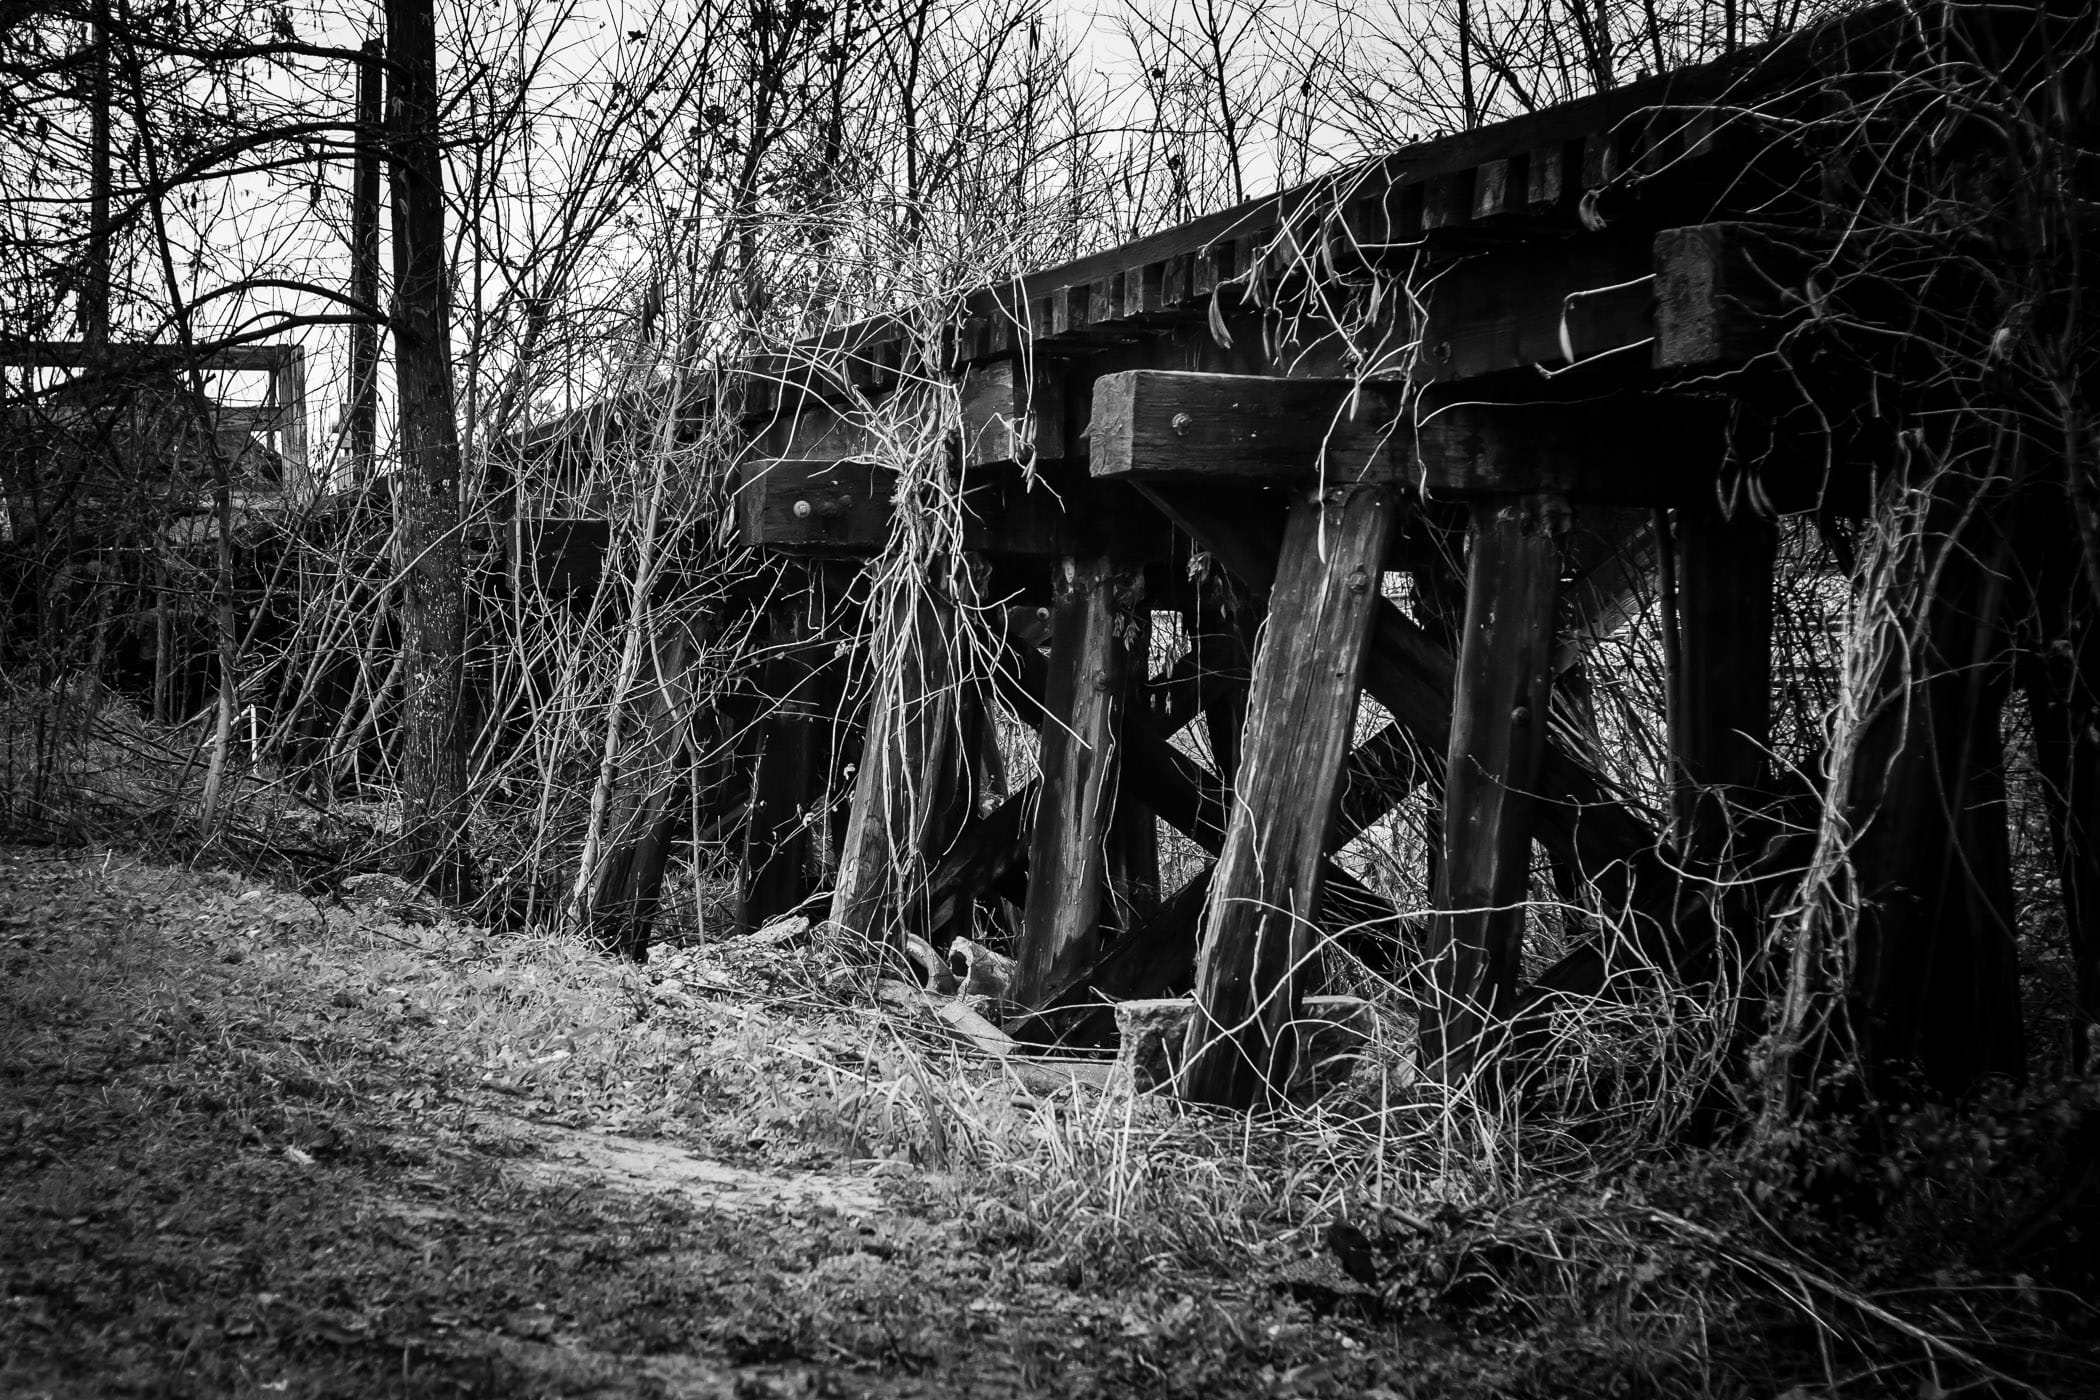 An abandoned and decaying railroad bridge in Jefferson, Texas.